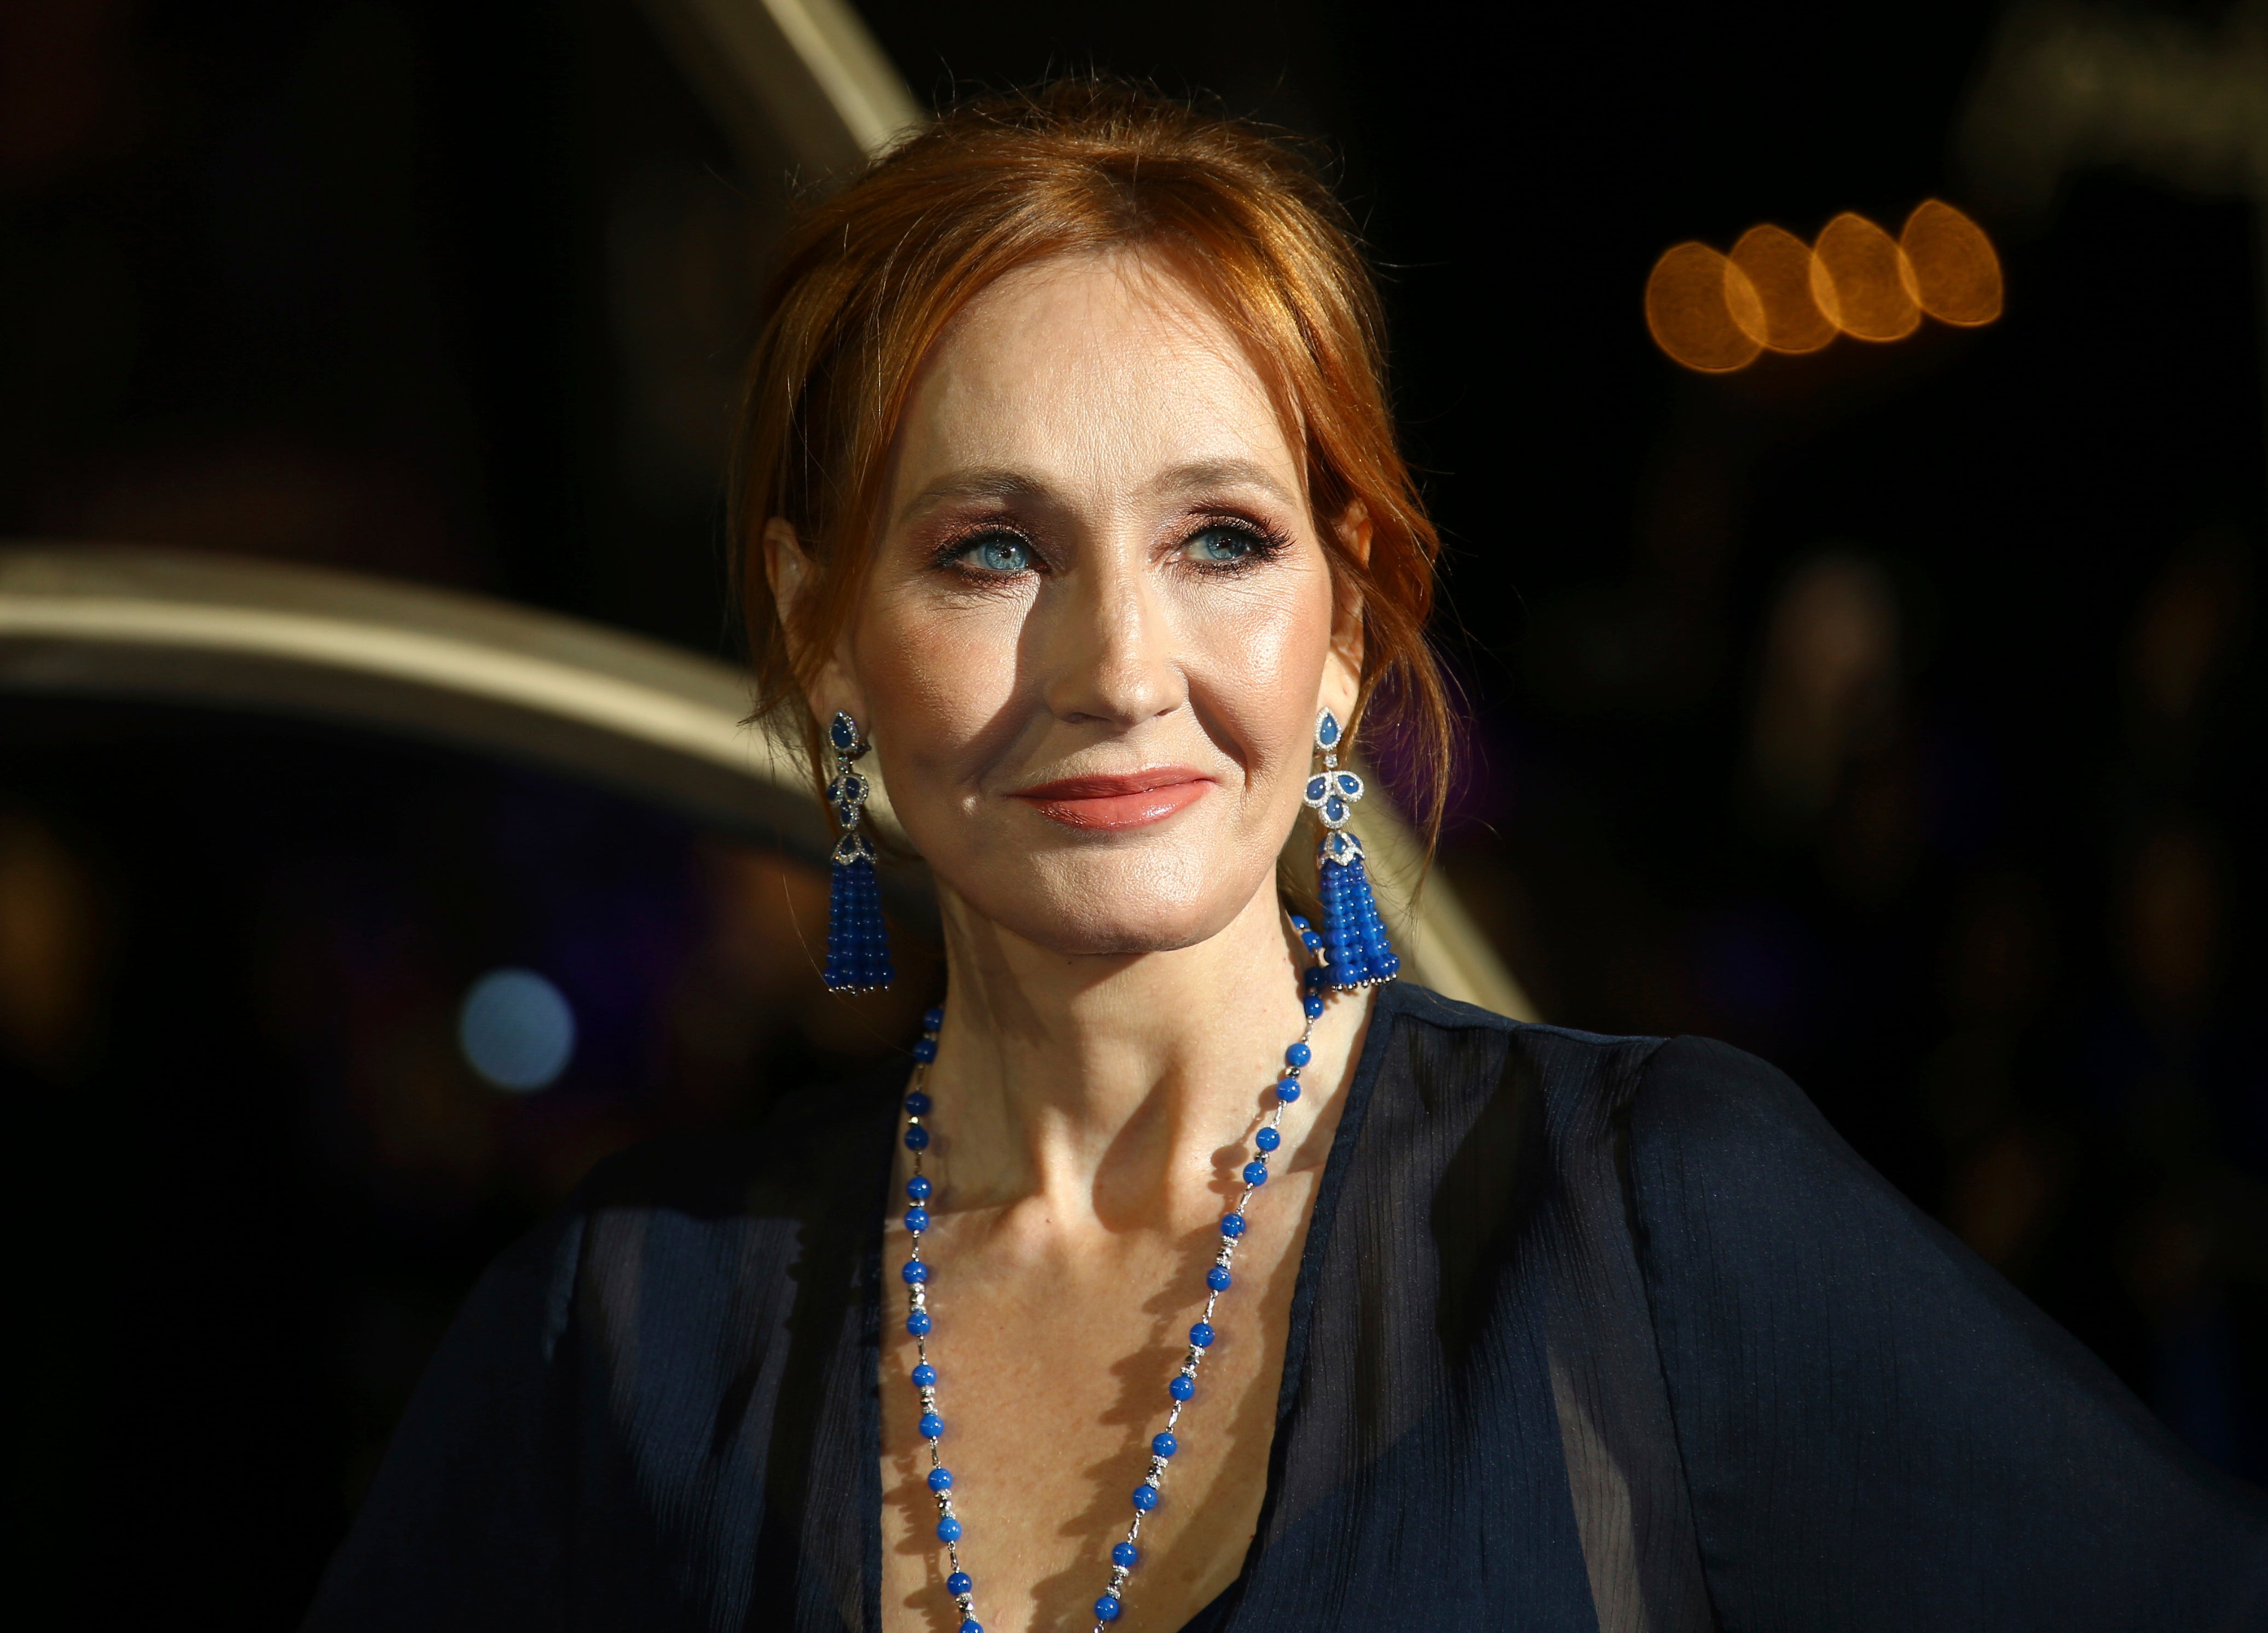 JK Rowling has come under fire for her social media attacks on transgender people